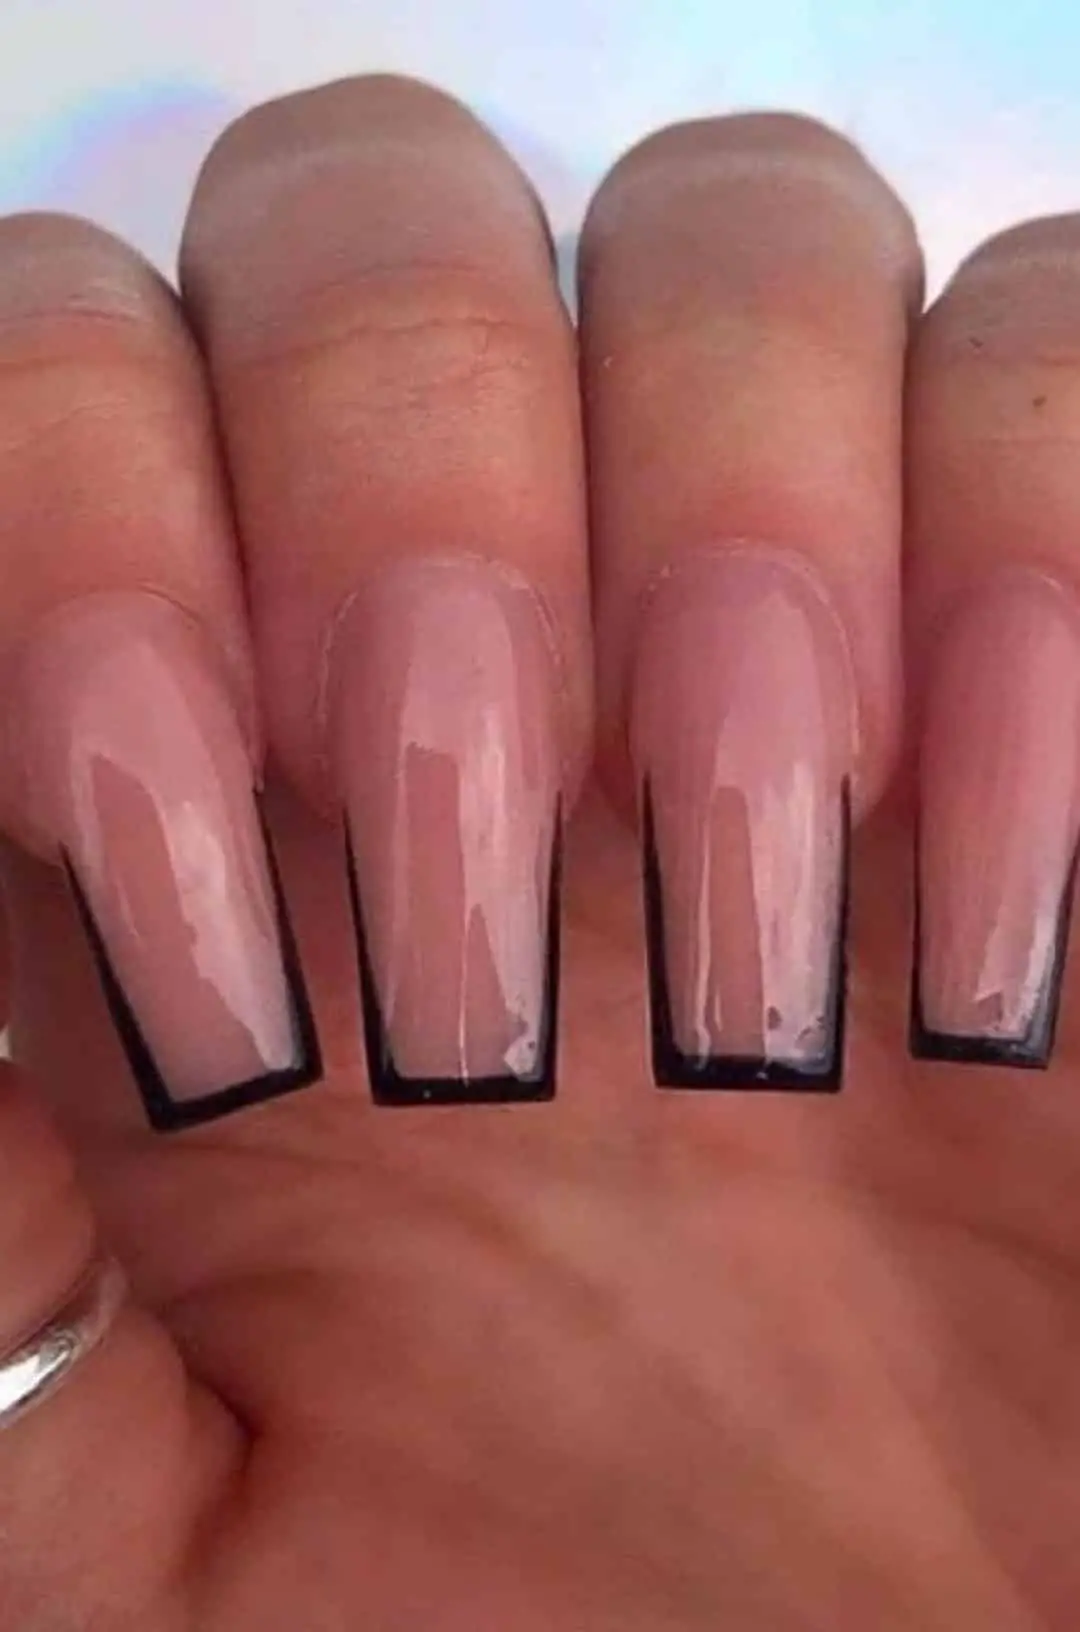 Tapered Square Nail designs